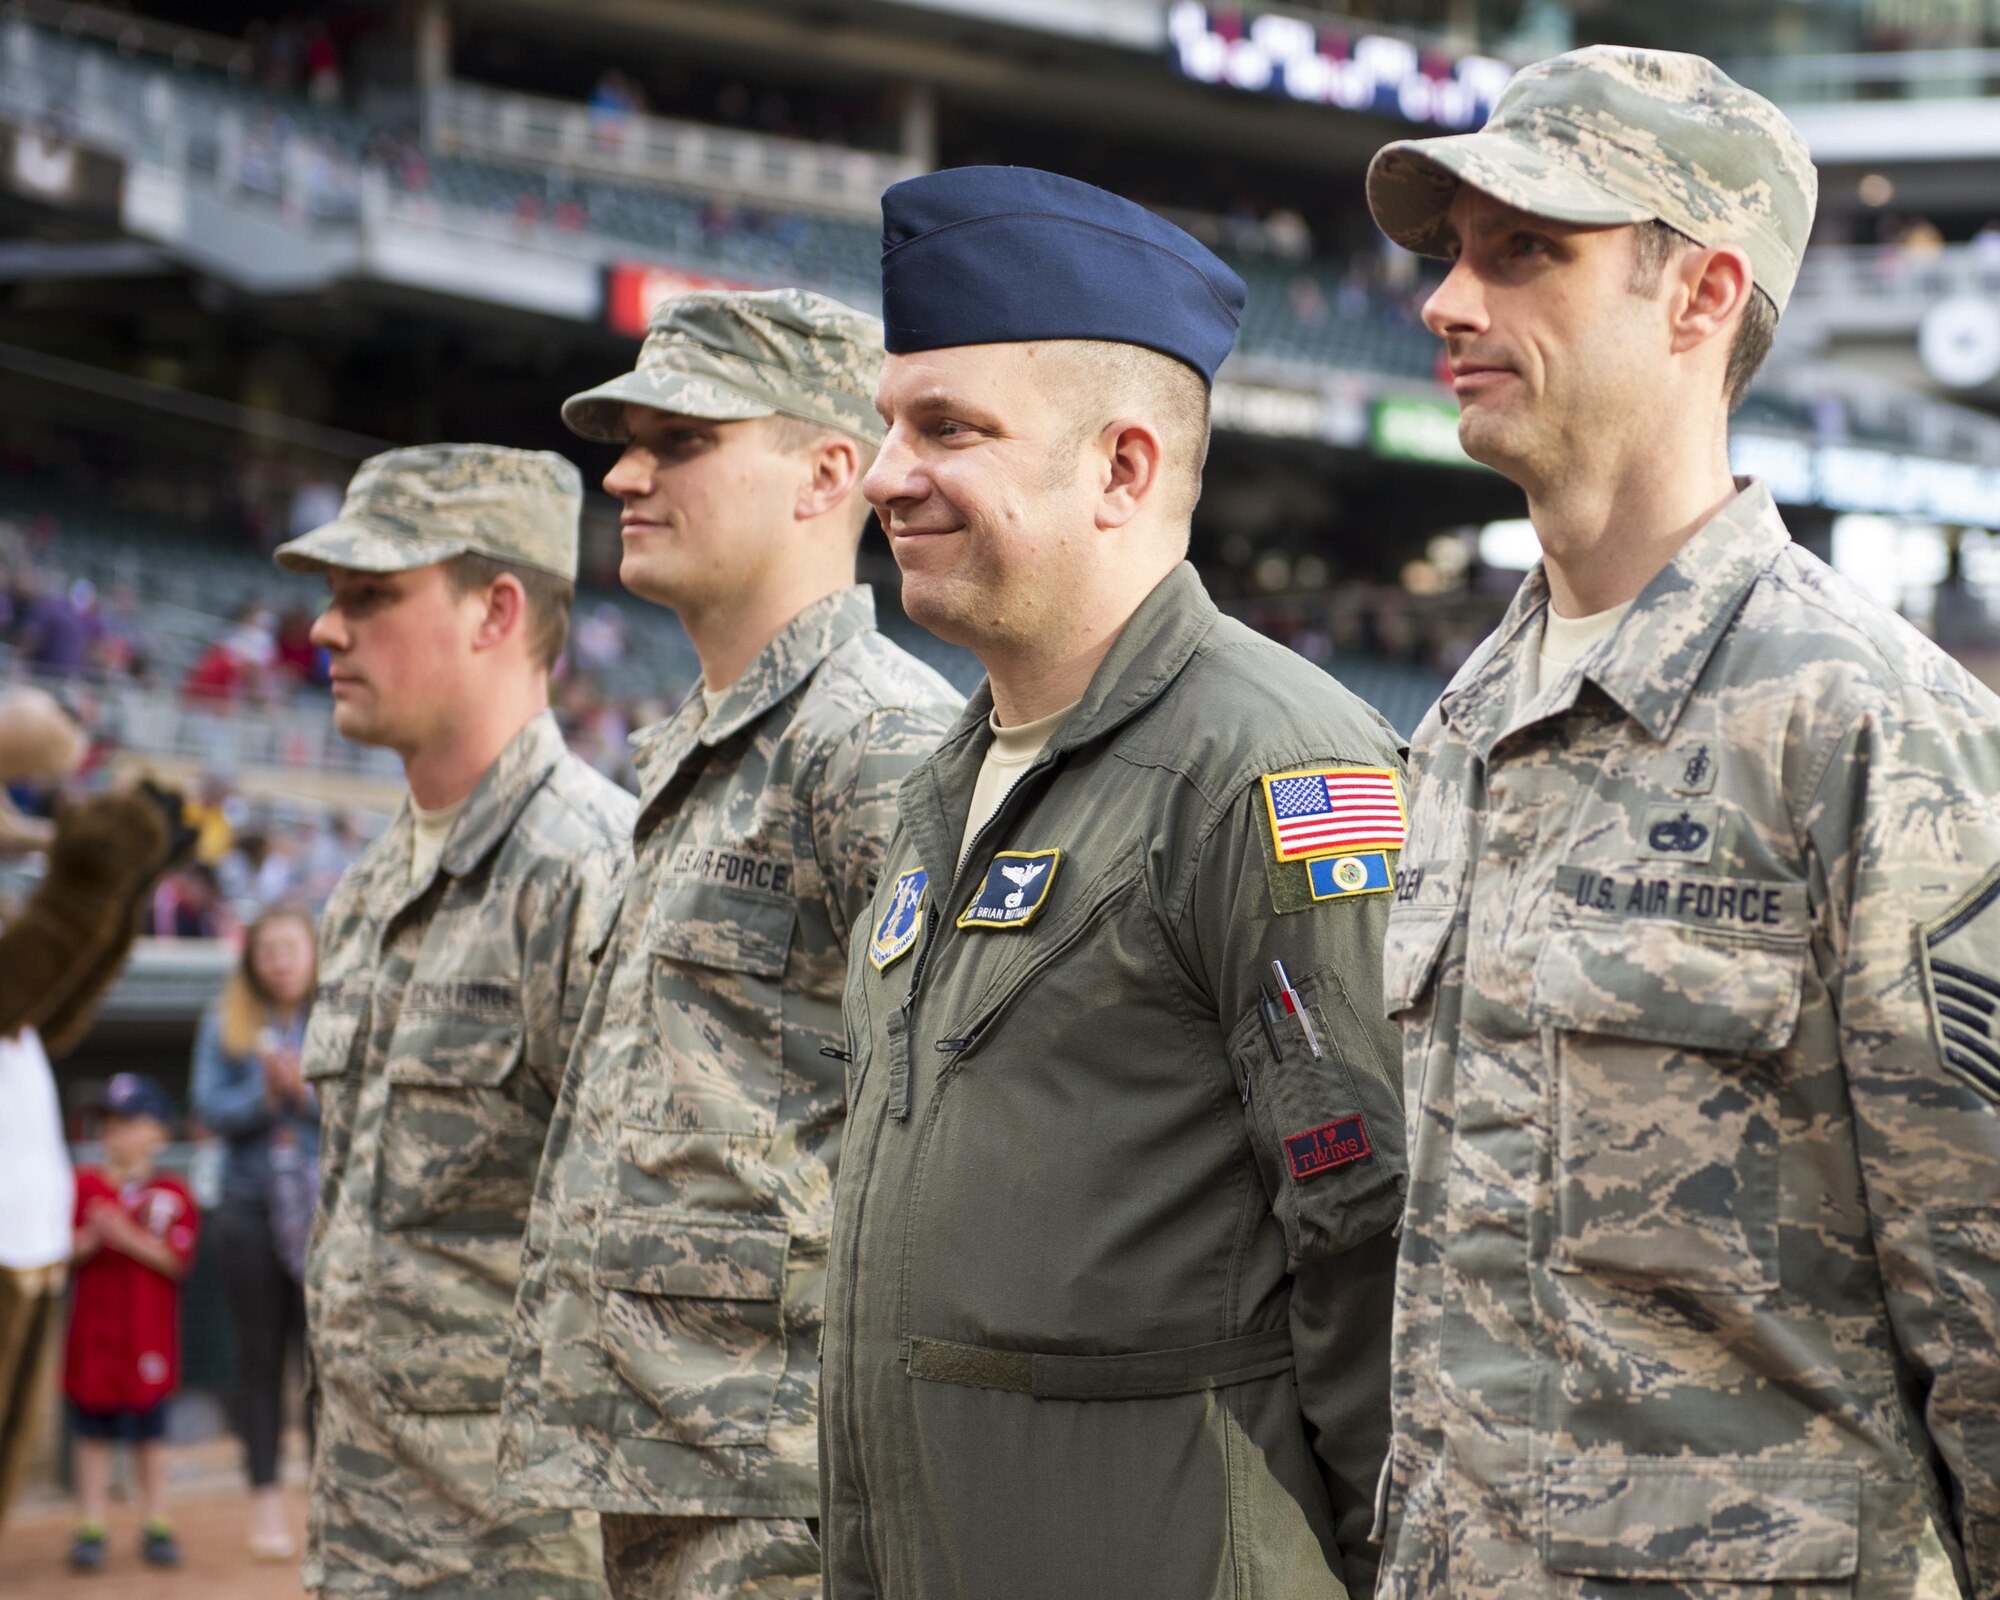 Outstanding airmen from the 133rd Airlift Wing were recognized before a Minnesota Twins home game at Target Field in Minneapolis, Minn., May 2, 2017. These stellar airman were selected for being dedicated to their missions, while being leaders in both the Minnesota Air National Guard and in their communities.
(U.S. Air National Guard photo by Tech. Sgt. Austen R. Adriaens/Released)